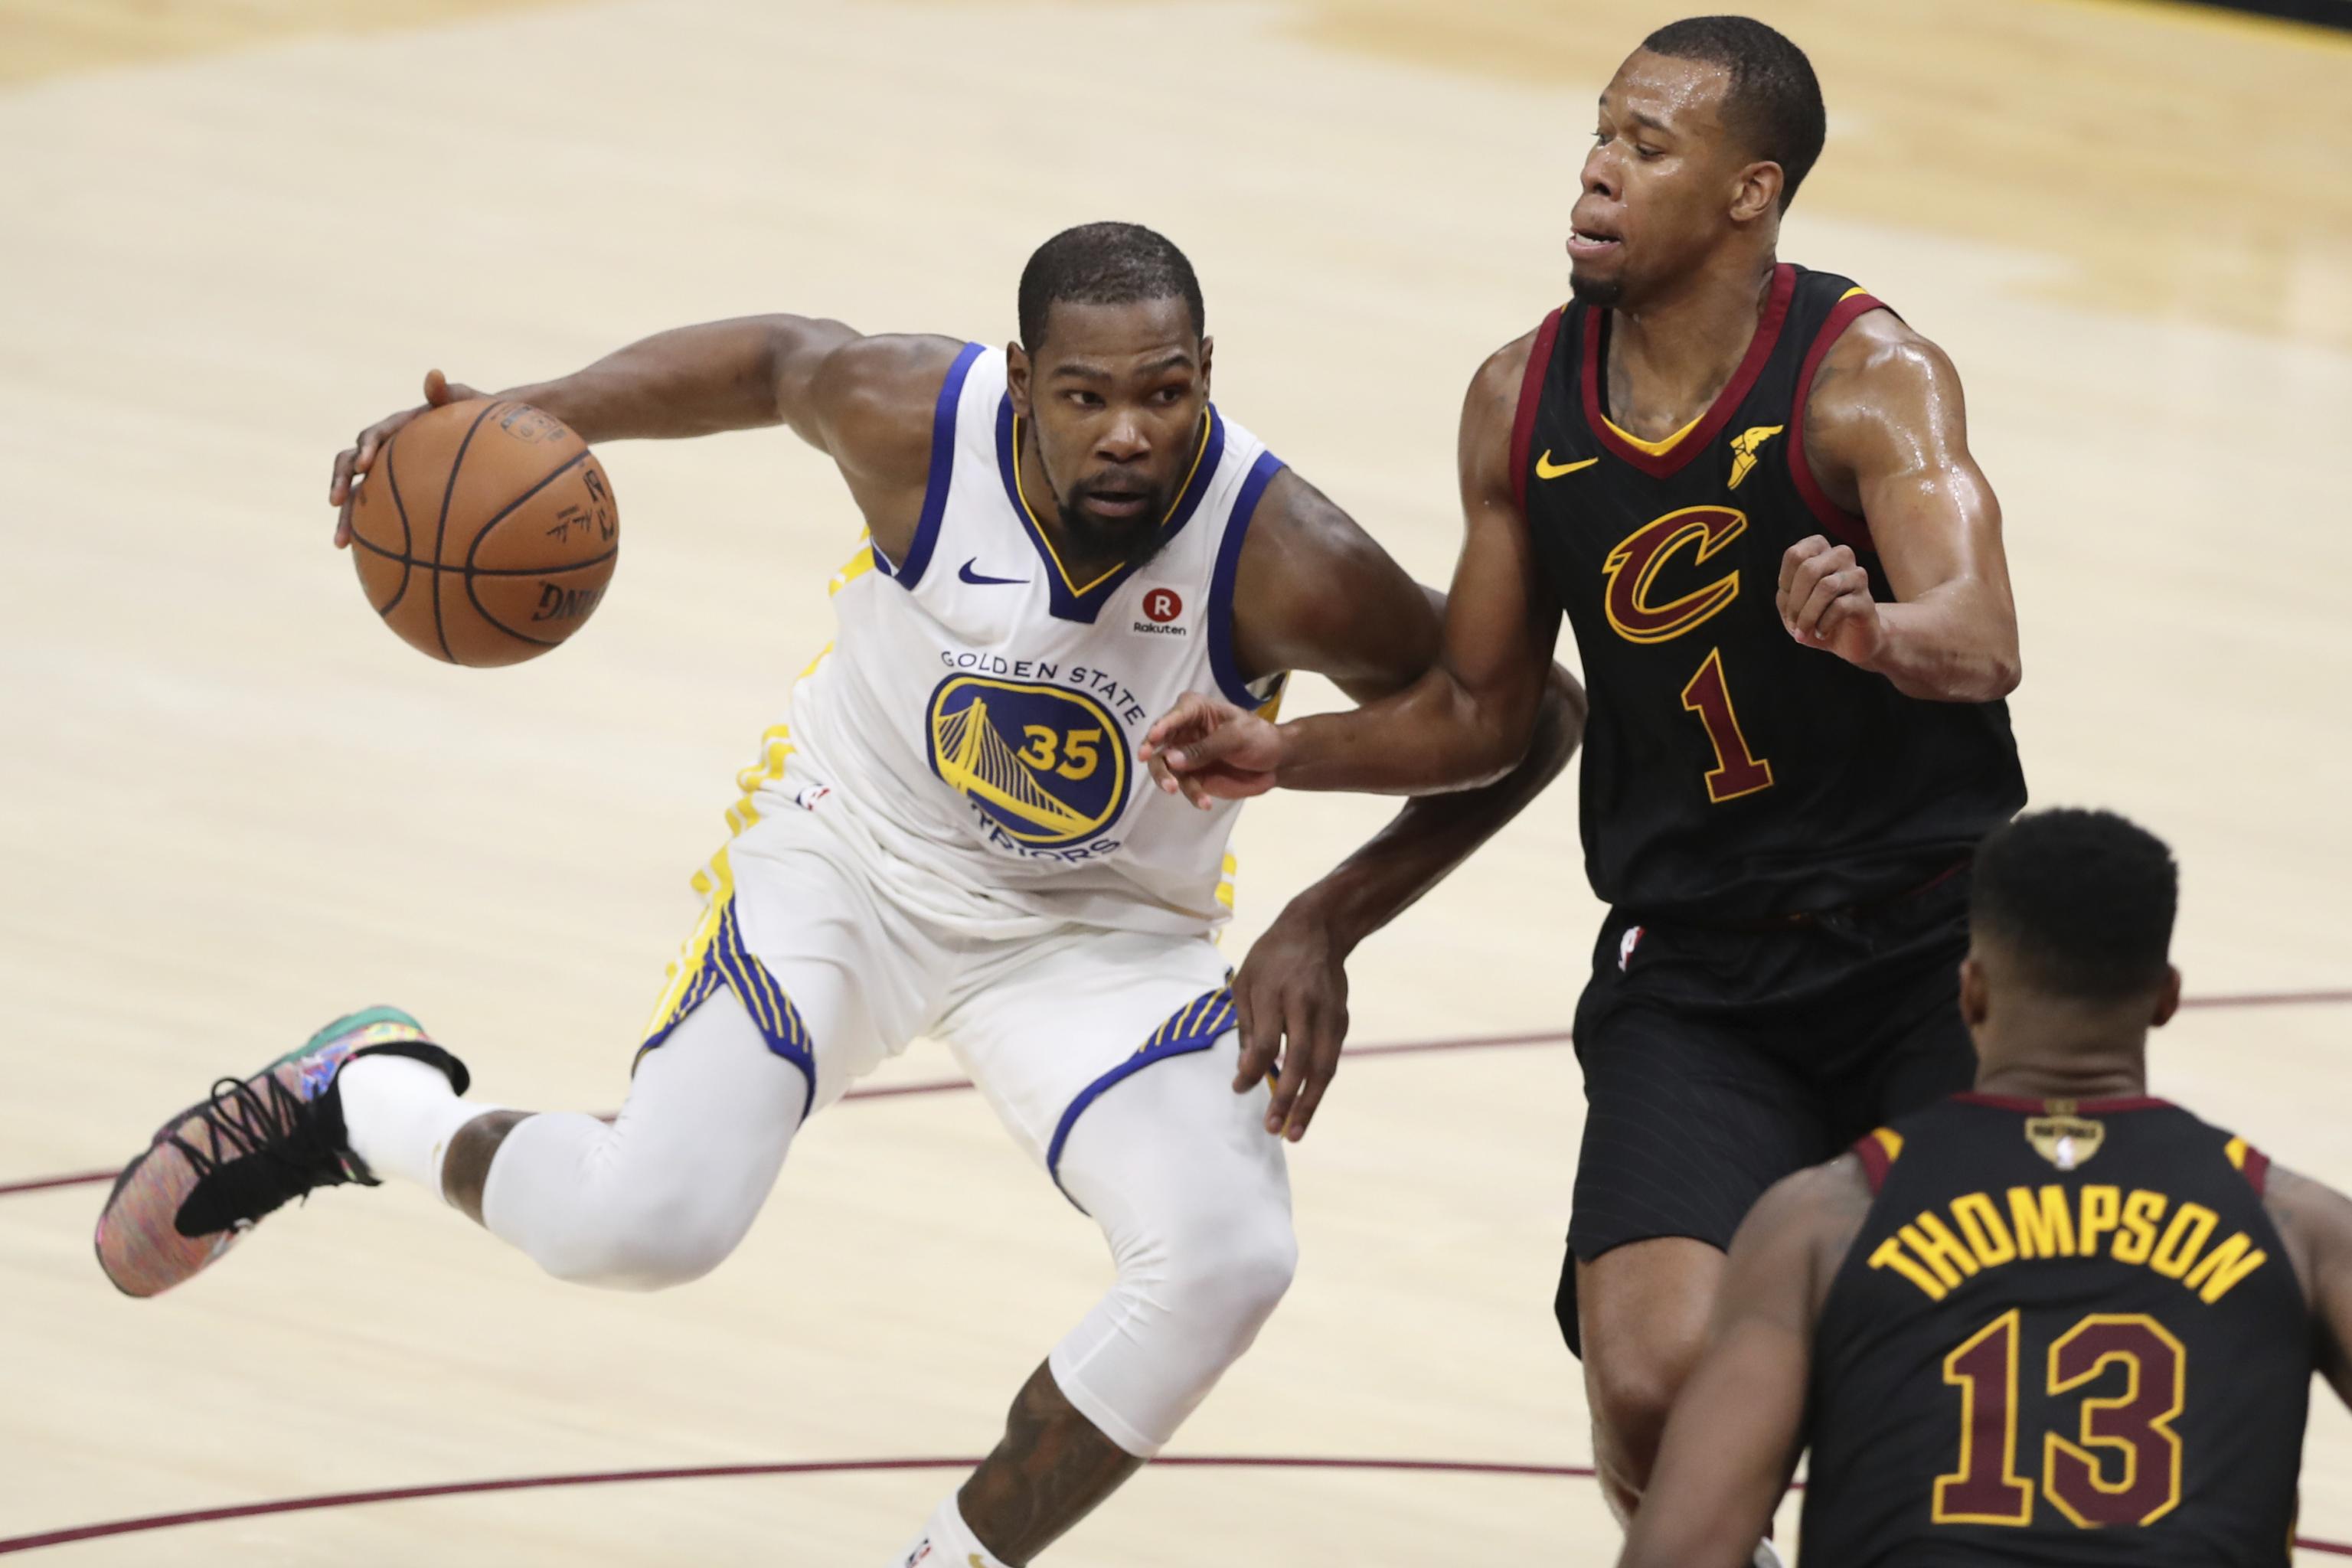 Nba Finals 2018 Odds Prop Bets Score Prediction For Warriors Vs Cavs Game 4 Bleacher Report Latest News Videos And Highlights